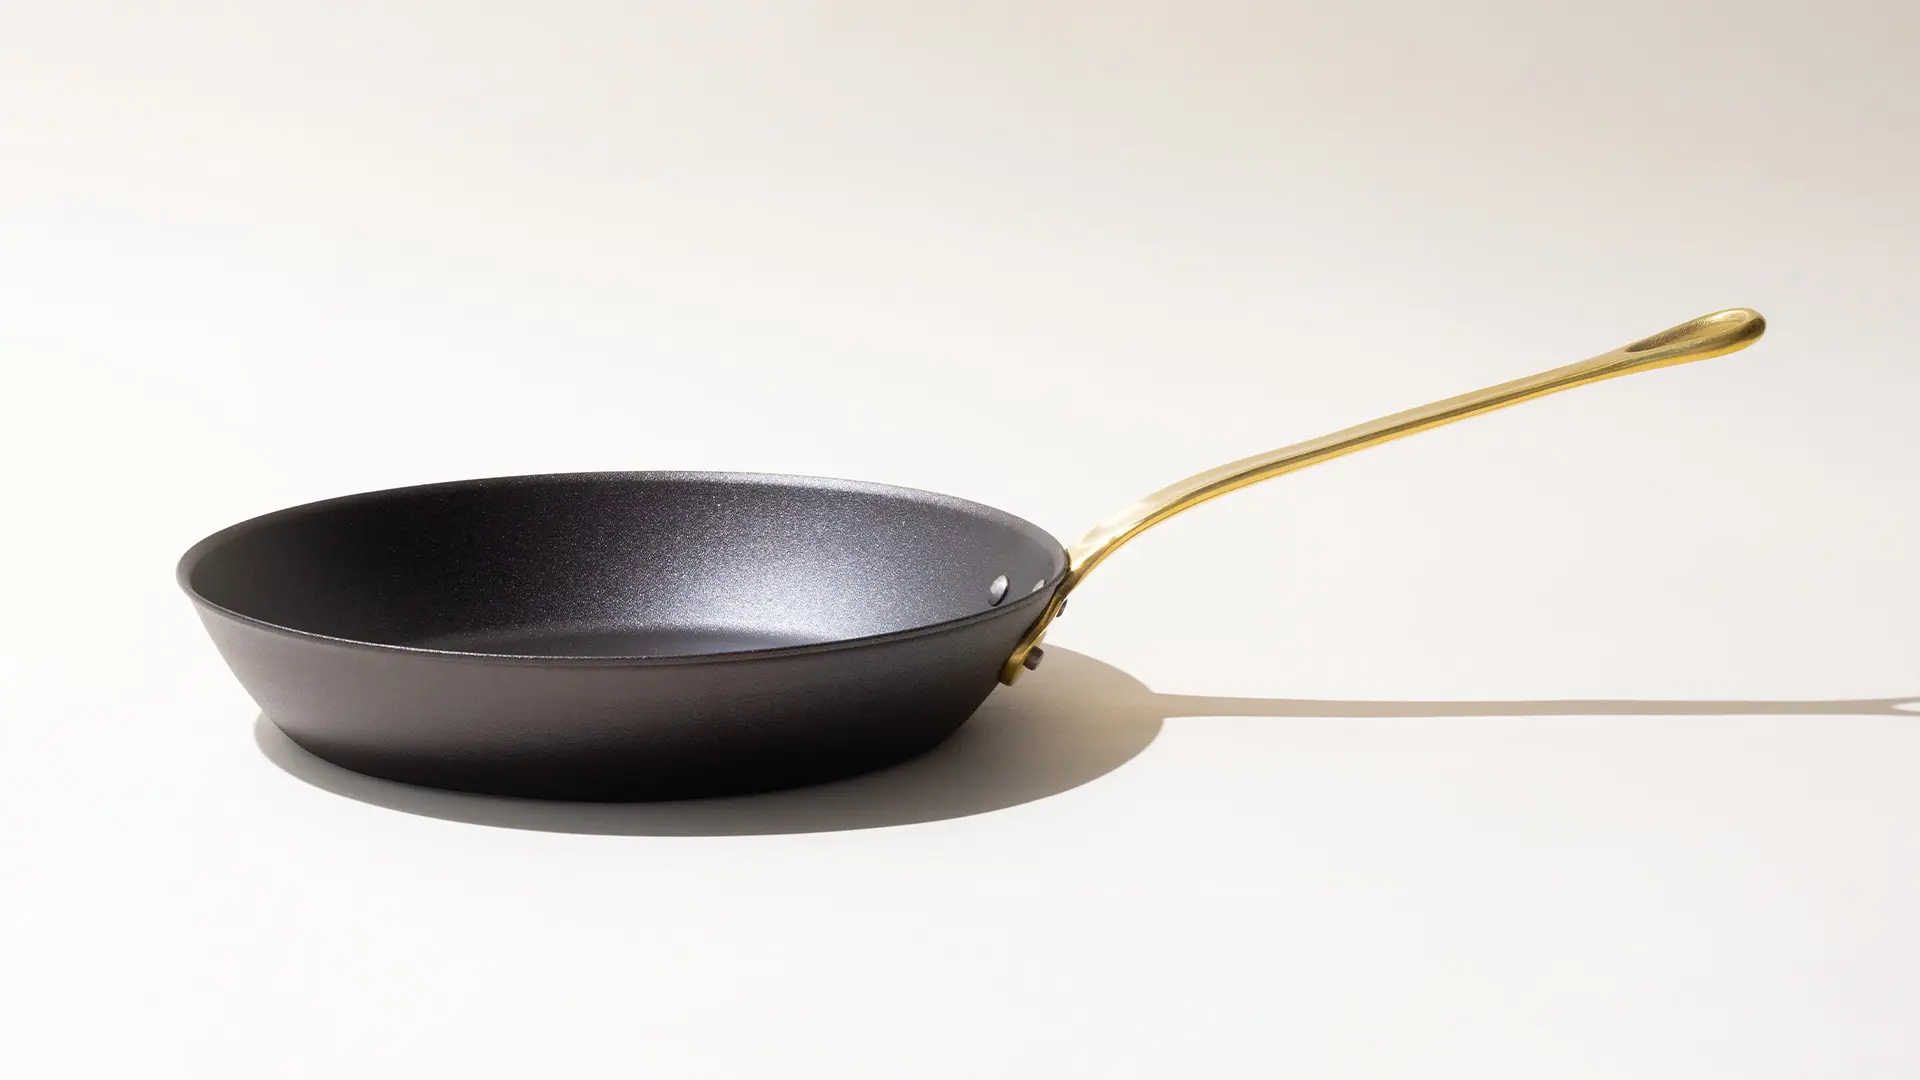 A black frying pan with a golden handle on a light background.